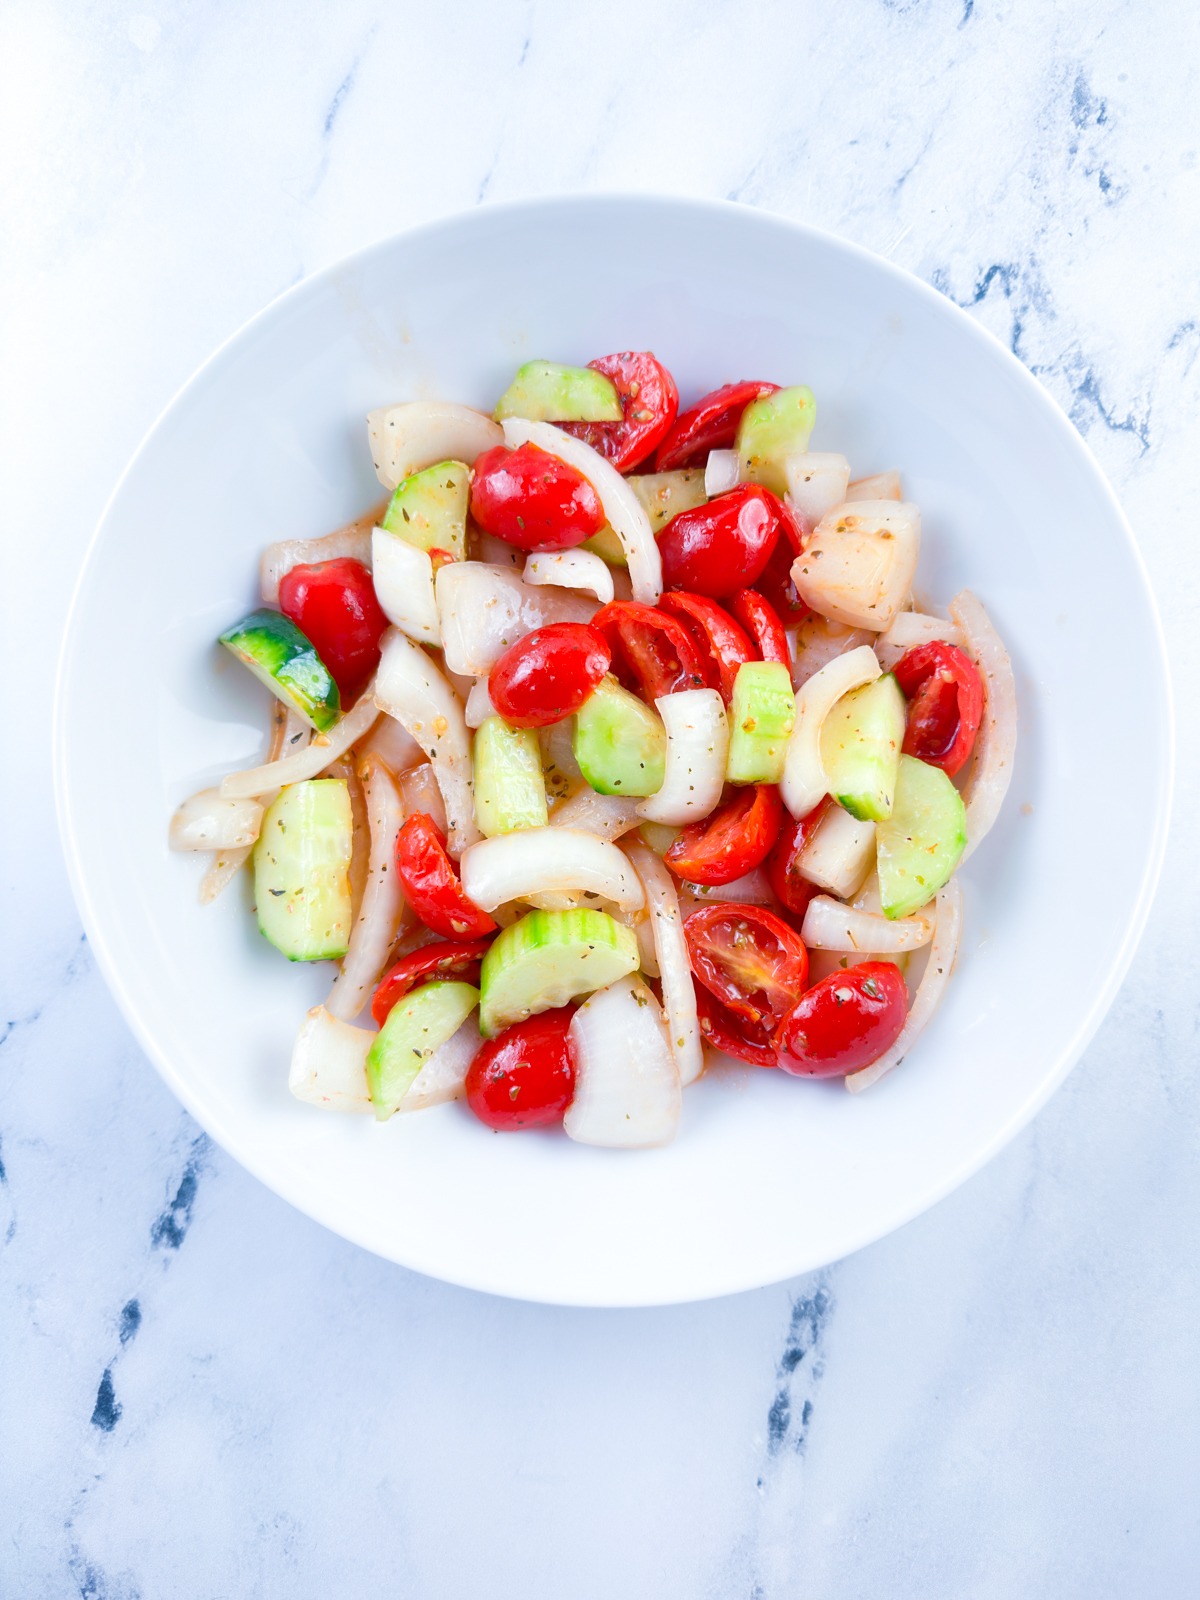 Marinated cucumber tomato and onion salad recipe ready to eat in a white bowl